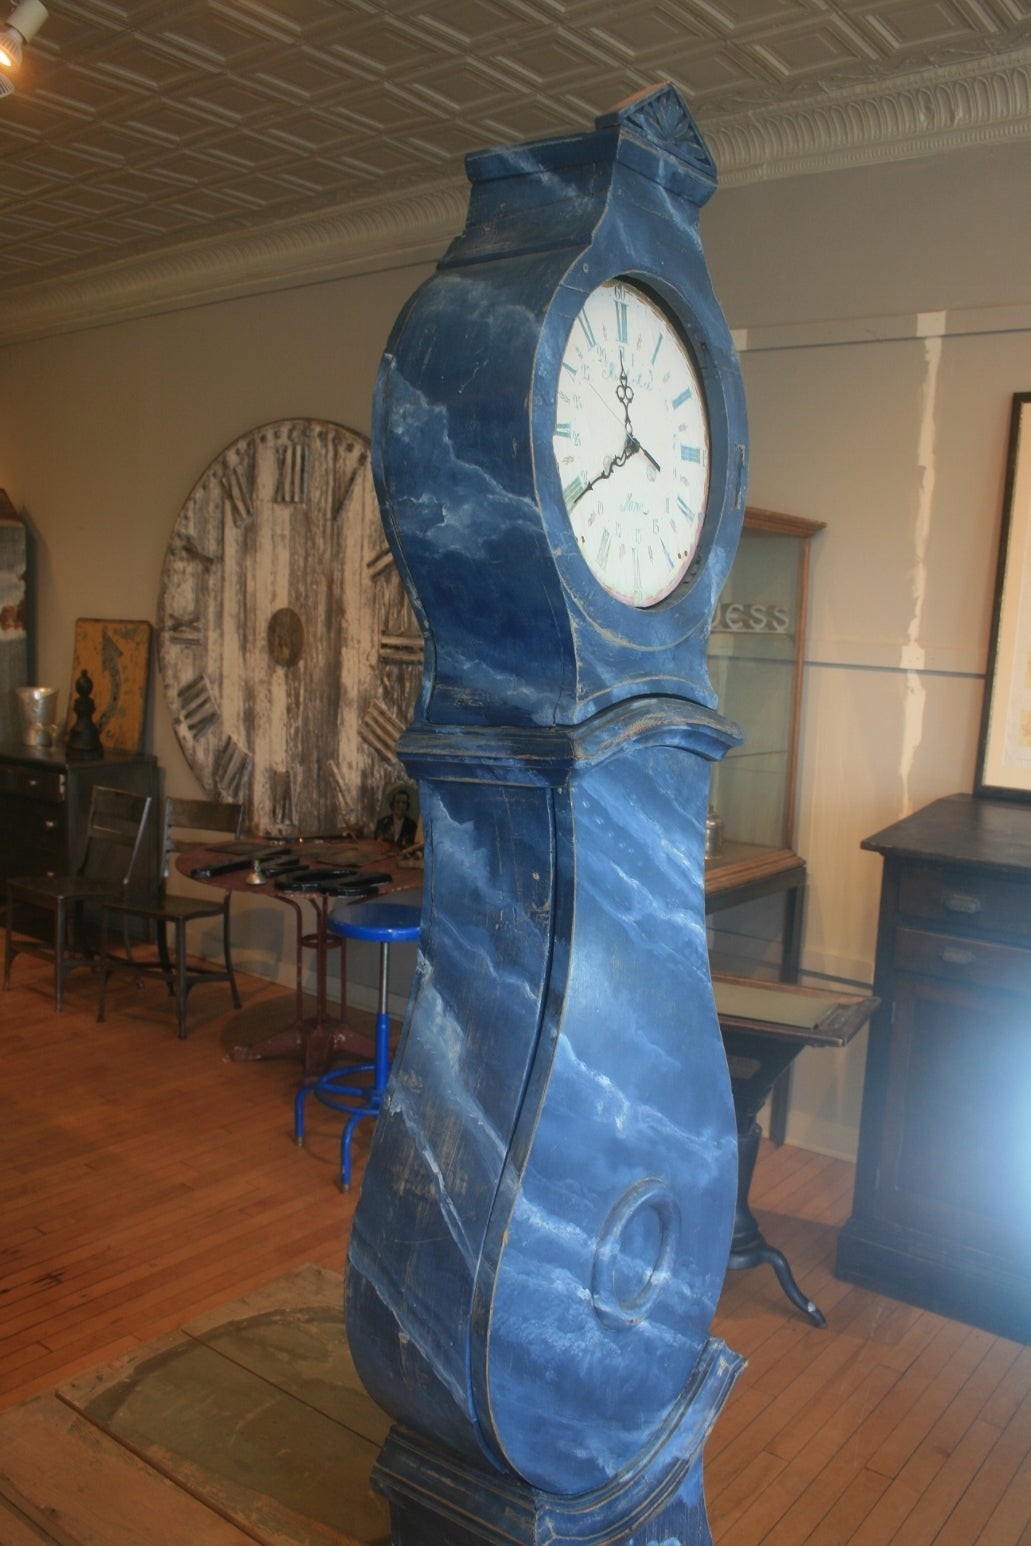 Great Swedish mora clock, circa 1810 with blue faux marble paint, makes it a very unusual interesting and beautiful piece. I always love the sculptural look of these handmade clocks and the paint is usually a big reason so many of them are beautiful